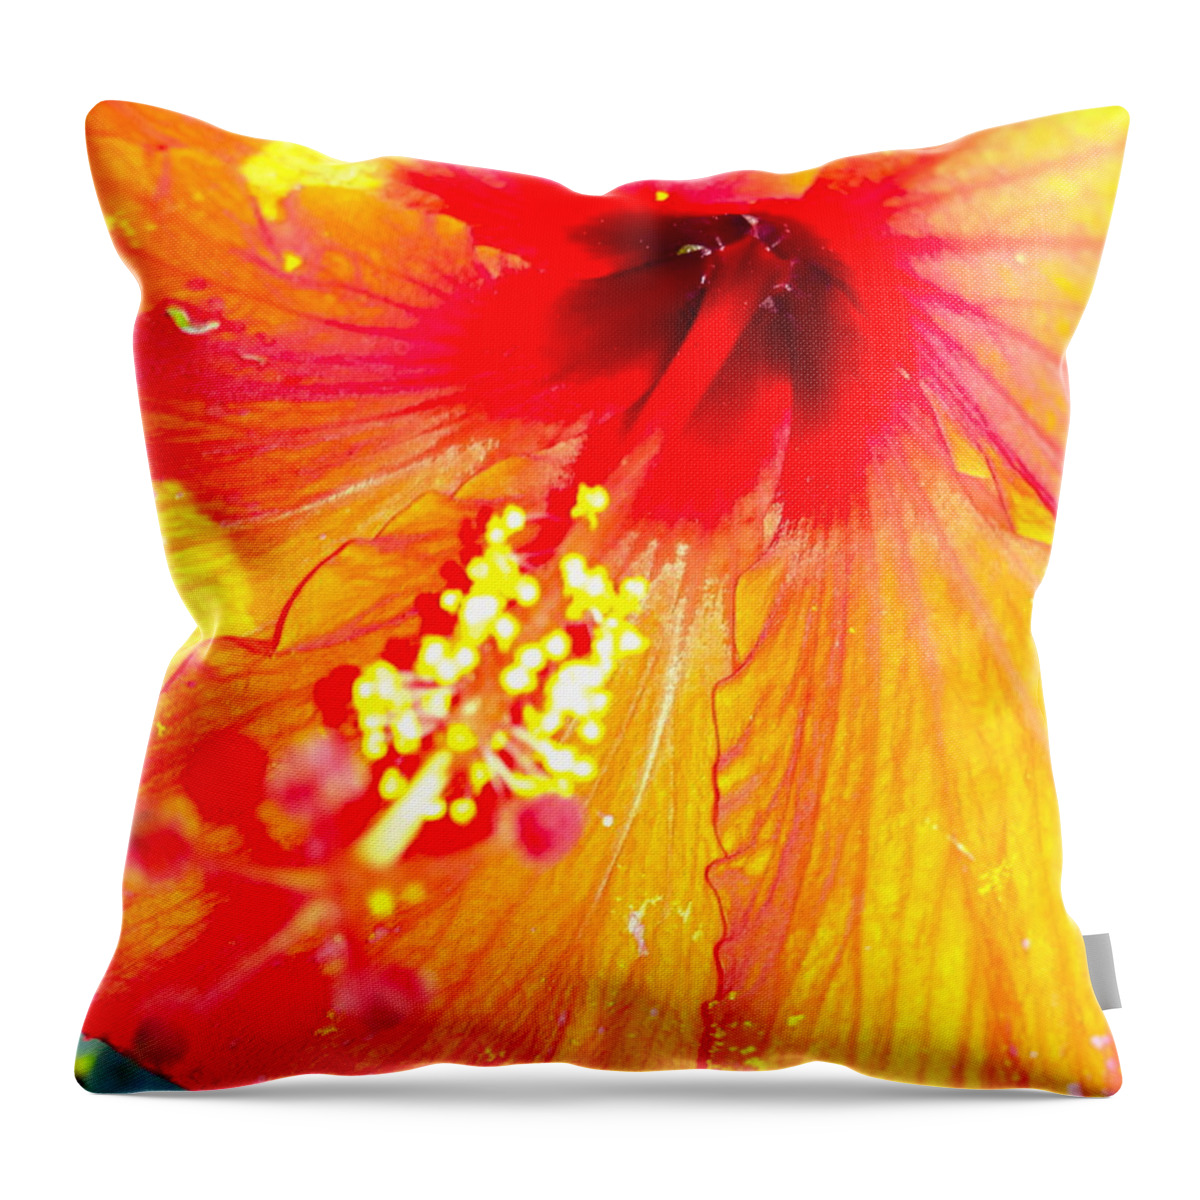 Orange Throw Pillow featuring the photograph Flower Fire by Beth Saffer